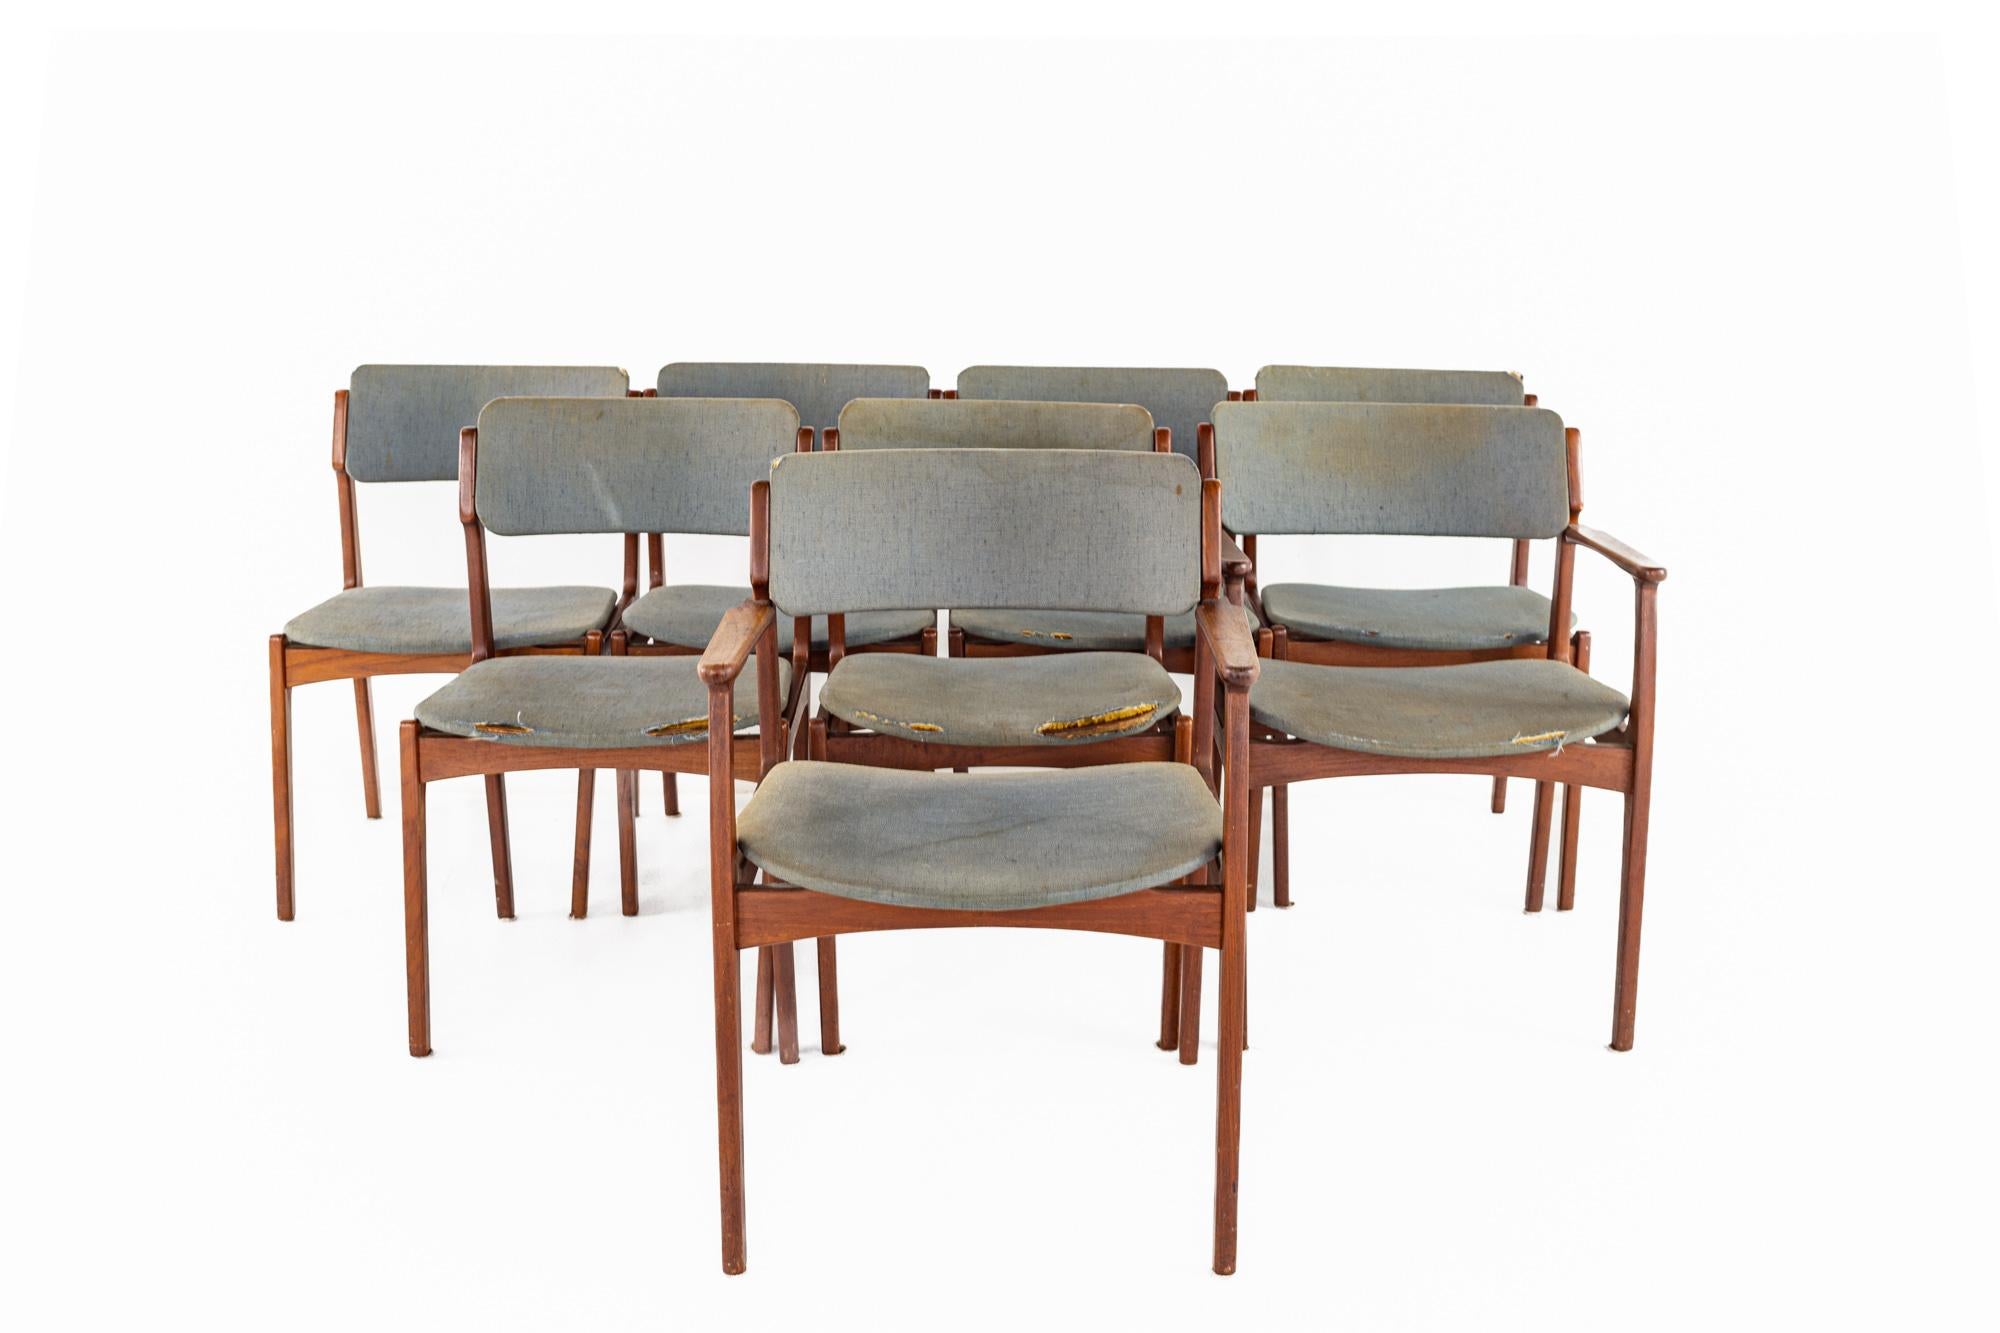 Erik Buch mid-century teak dining chairs - set of 8.

Each chair measures: 23 wide x 17 deep x 33 high, with a seat height of 16 and arm height of 25 inches.

Ready for new upholstery. This service is available for an additional fee.

All